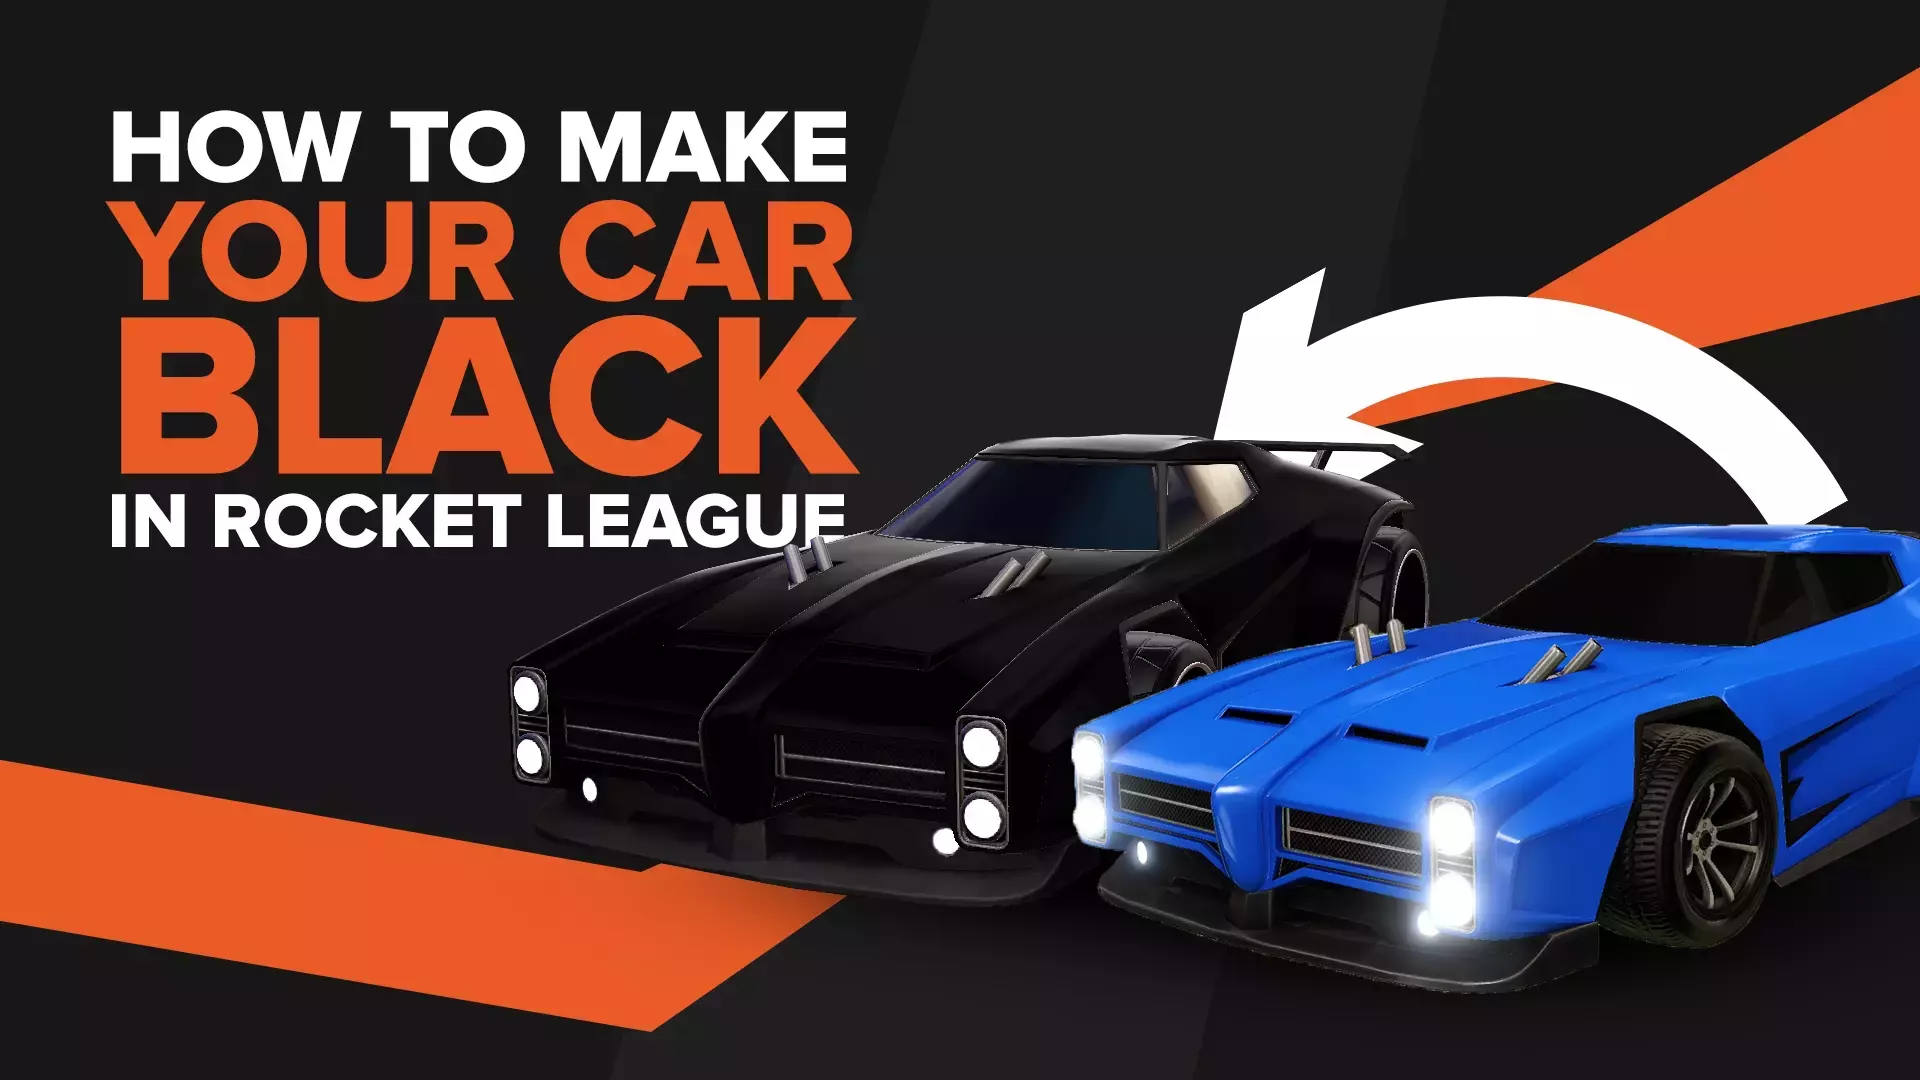 How To Make Your Car Black In Rocket League